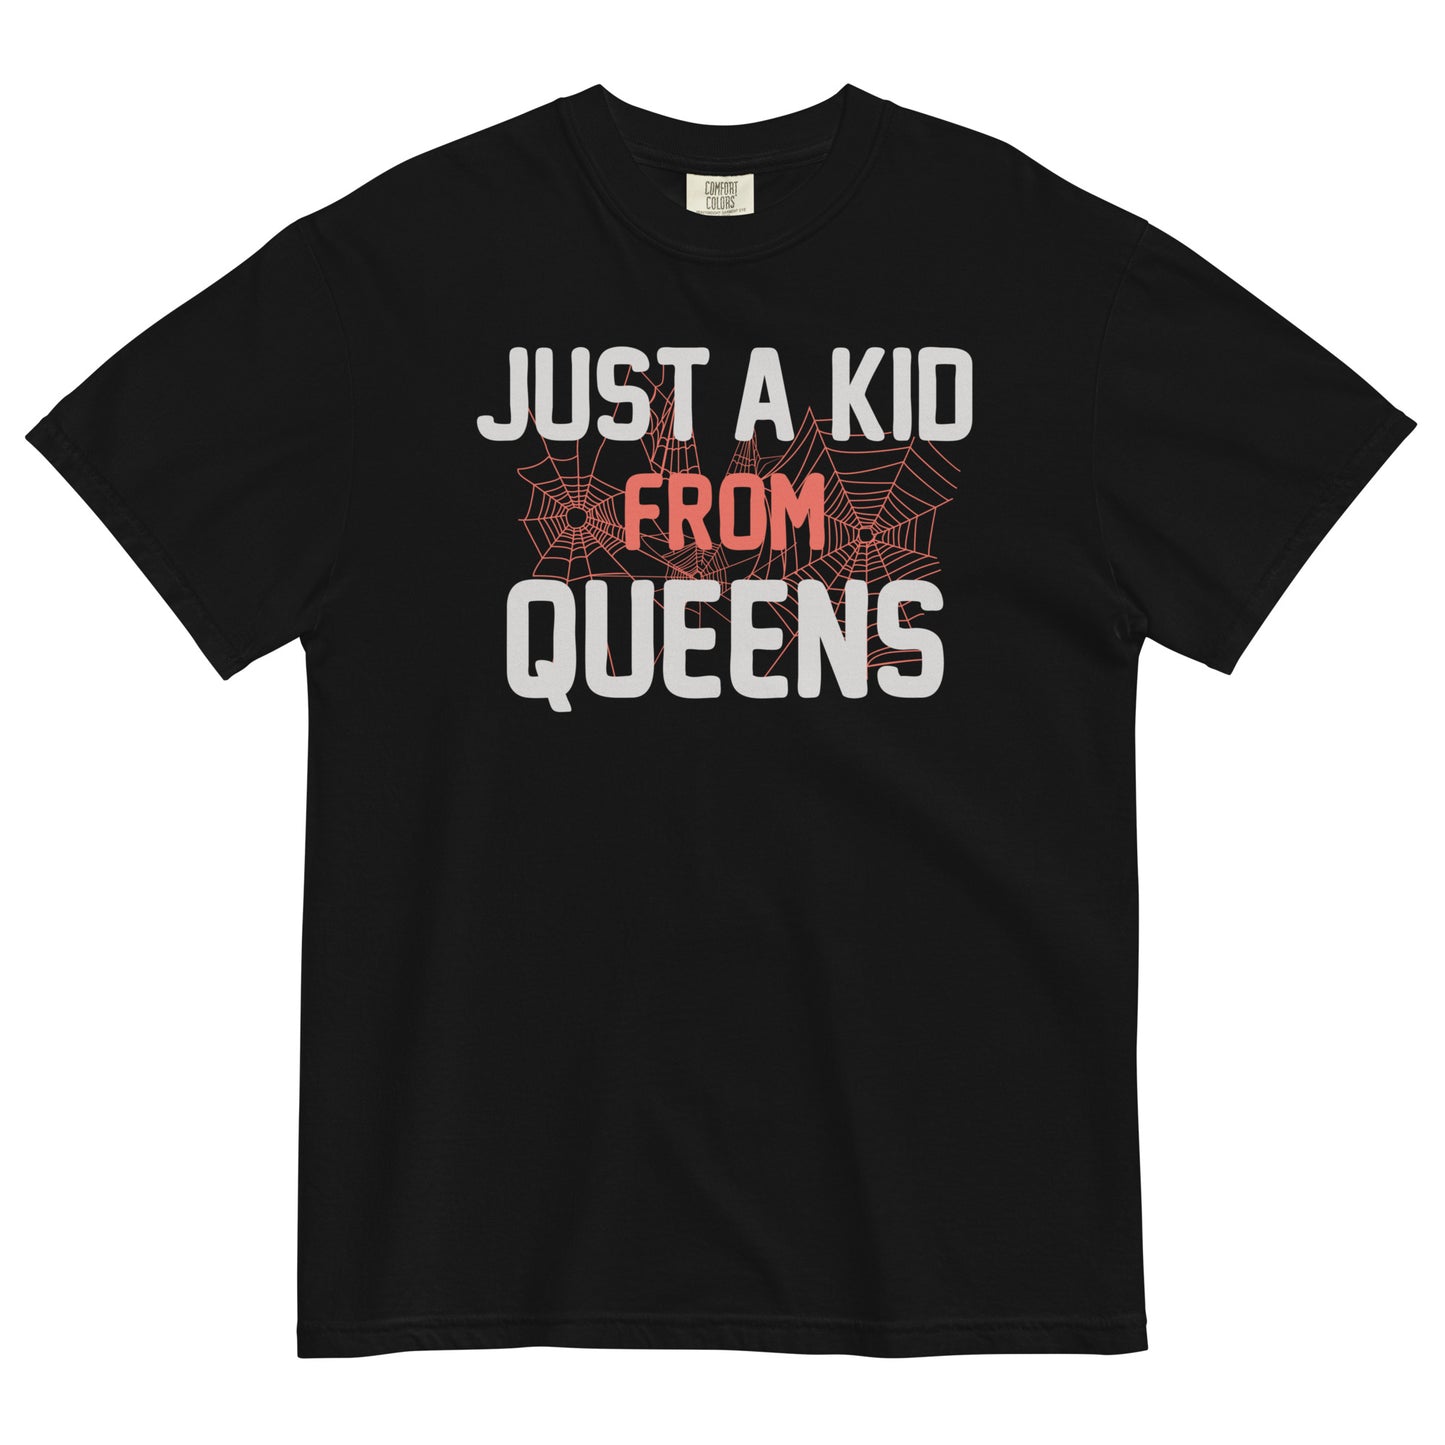 Just A Kid From Queens Men's Relaxed Fit Tee